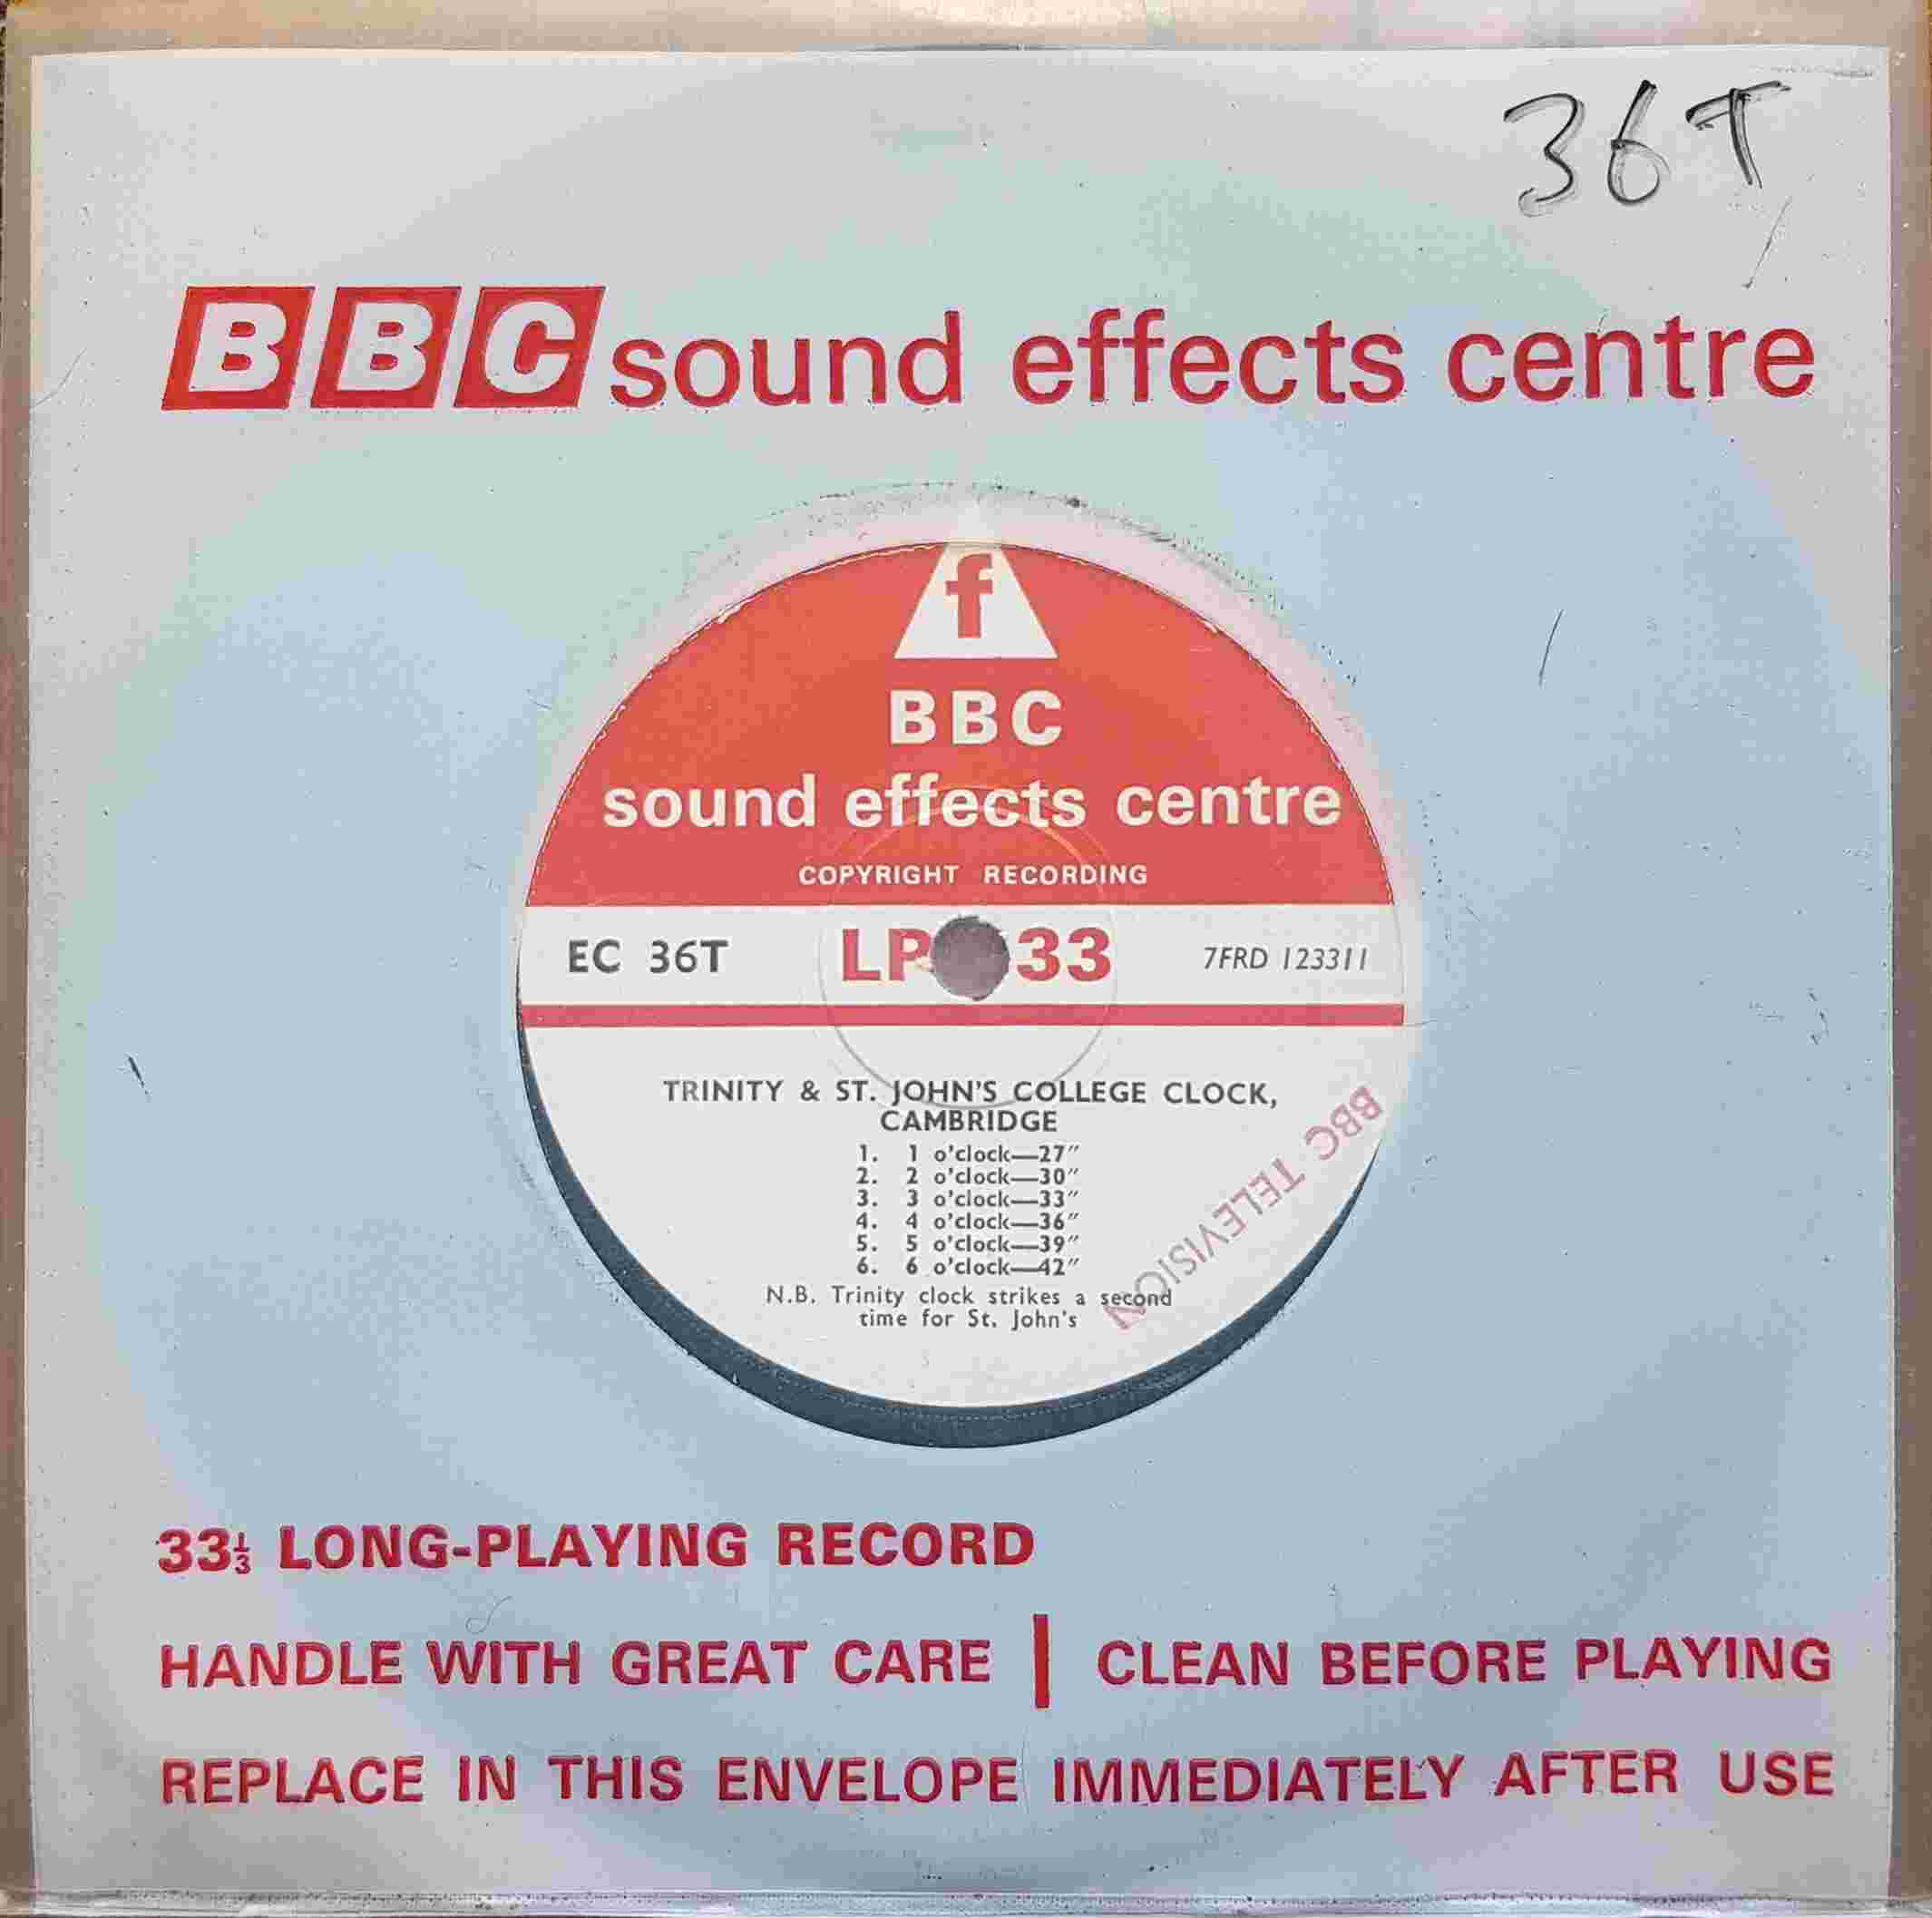 Picture of EC 36T Trinity & St. John's College clock, Cambridge by artist Not registered from the BBC singles - Records and Tapes library